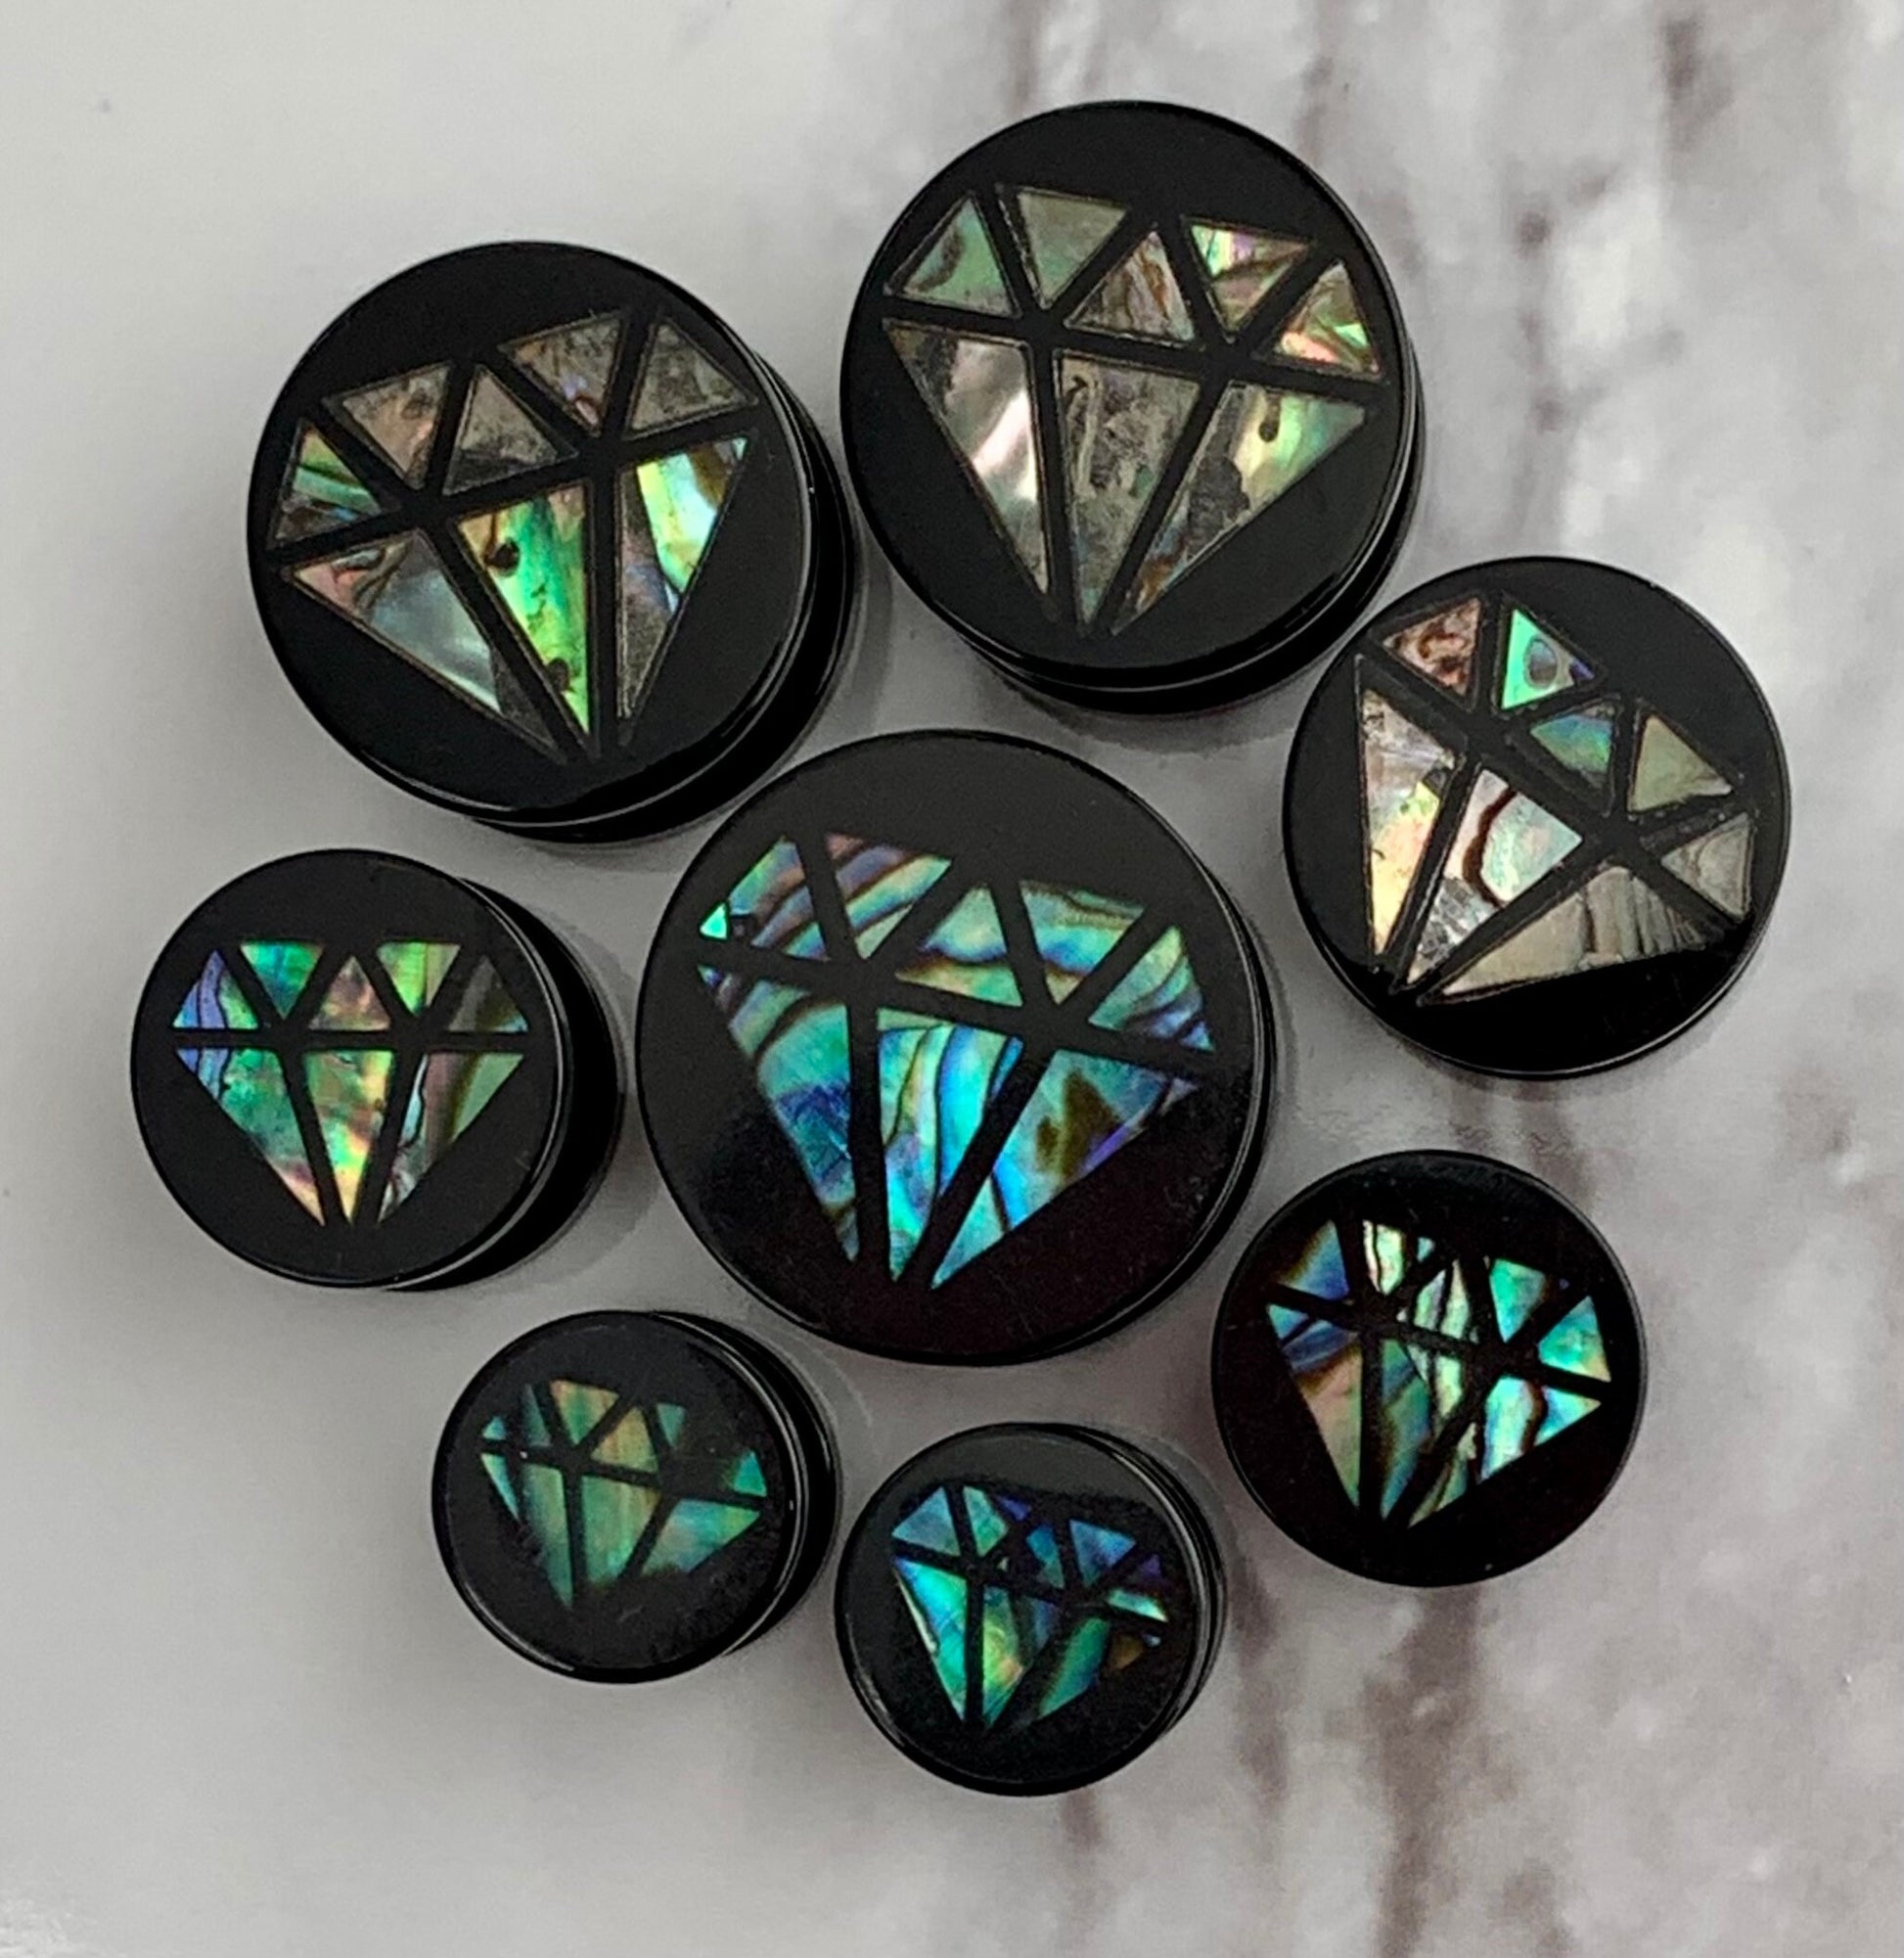 PAIR of Unique Diamond-Shaped Abalone Inlay Acrylic Screw Fit Plugs - Gauges 0g (8mm) thru 5/8" (16mm) available!